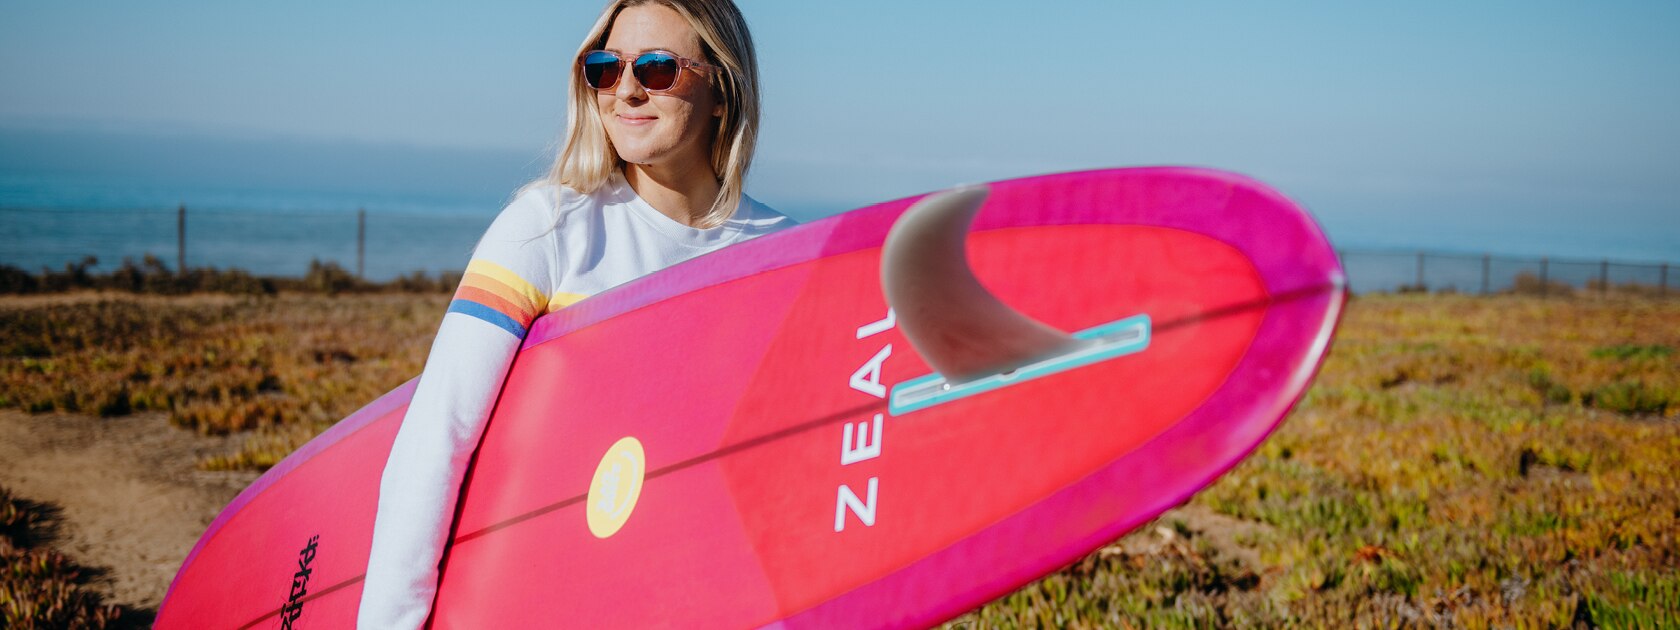 a woman with a bright pink surfboard wearing Zeal sunglasses